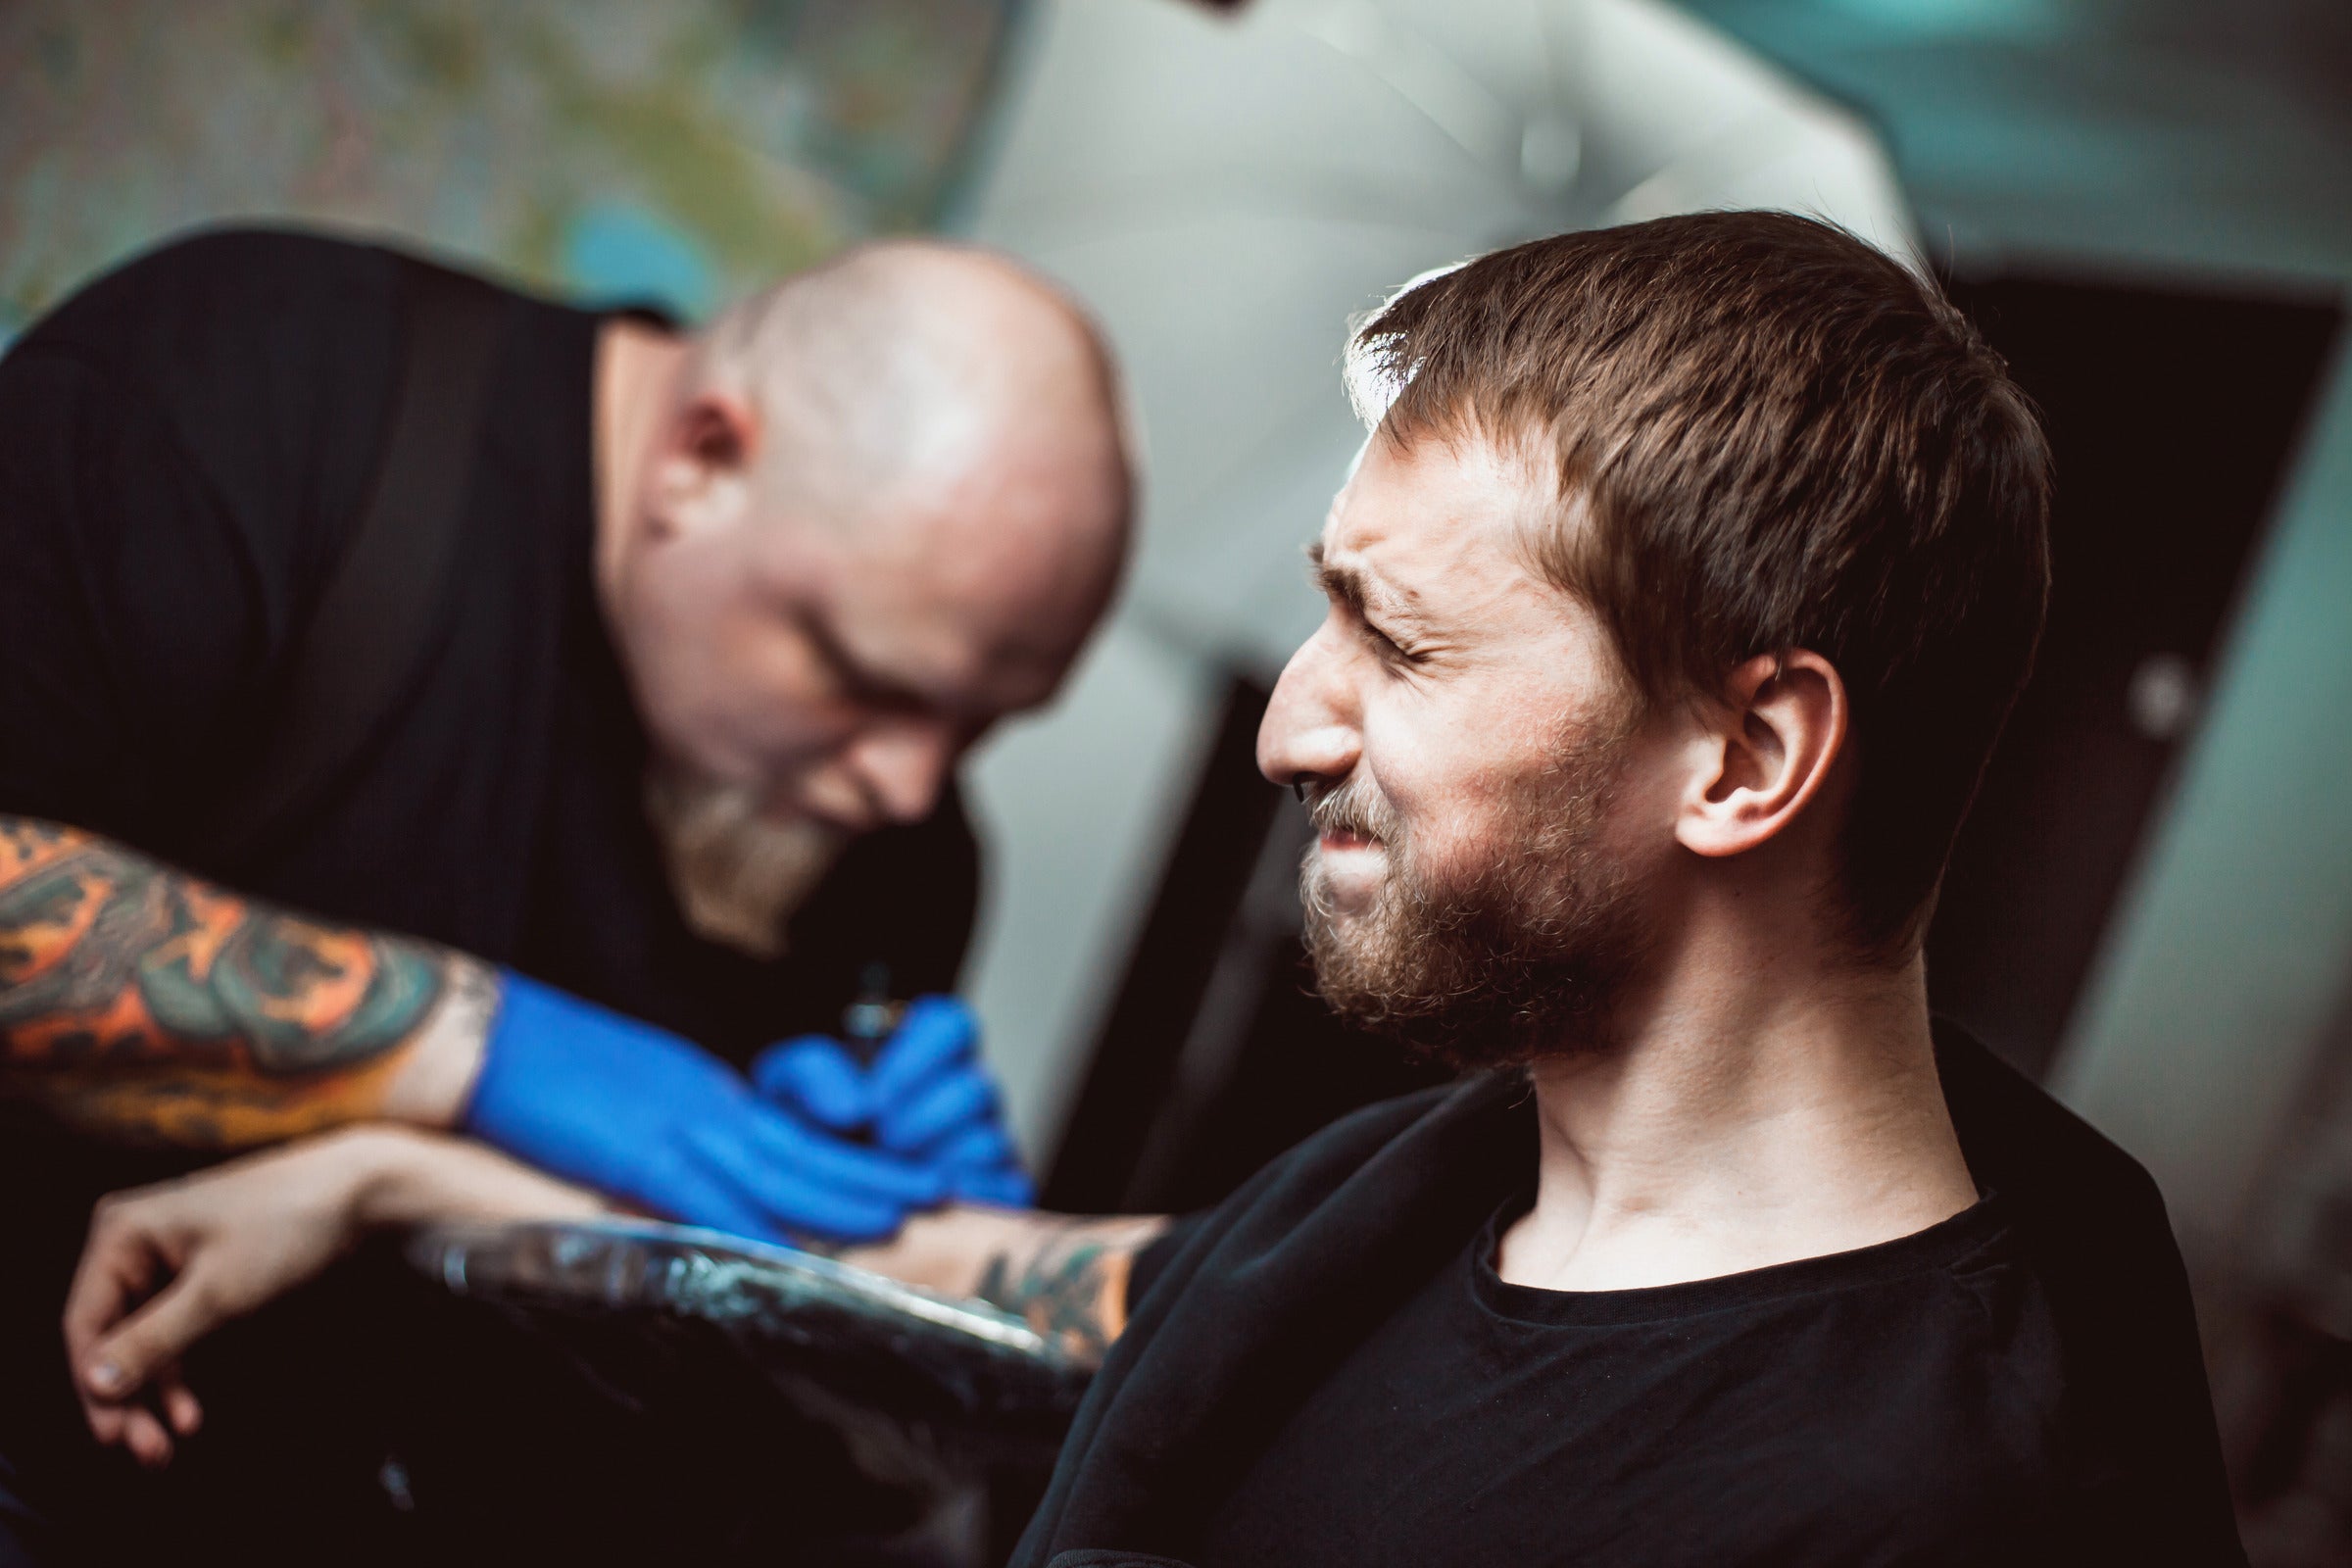 There are 11 risks associated with tattooing over a cut